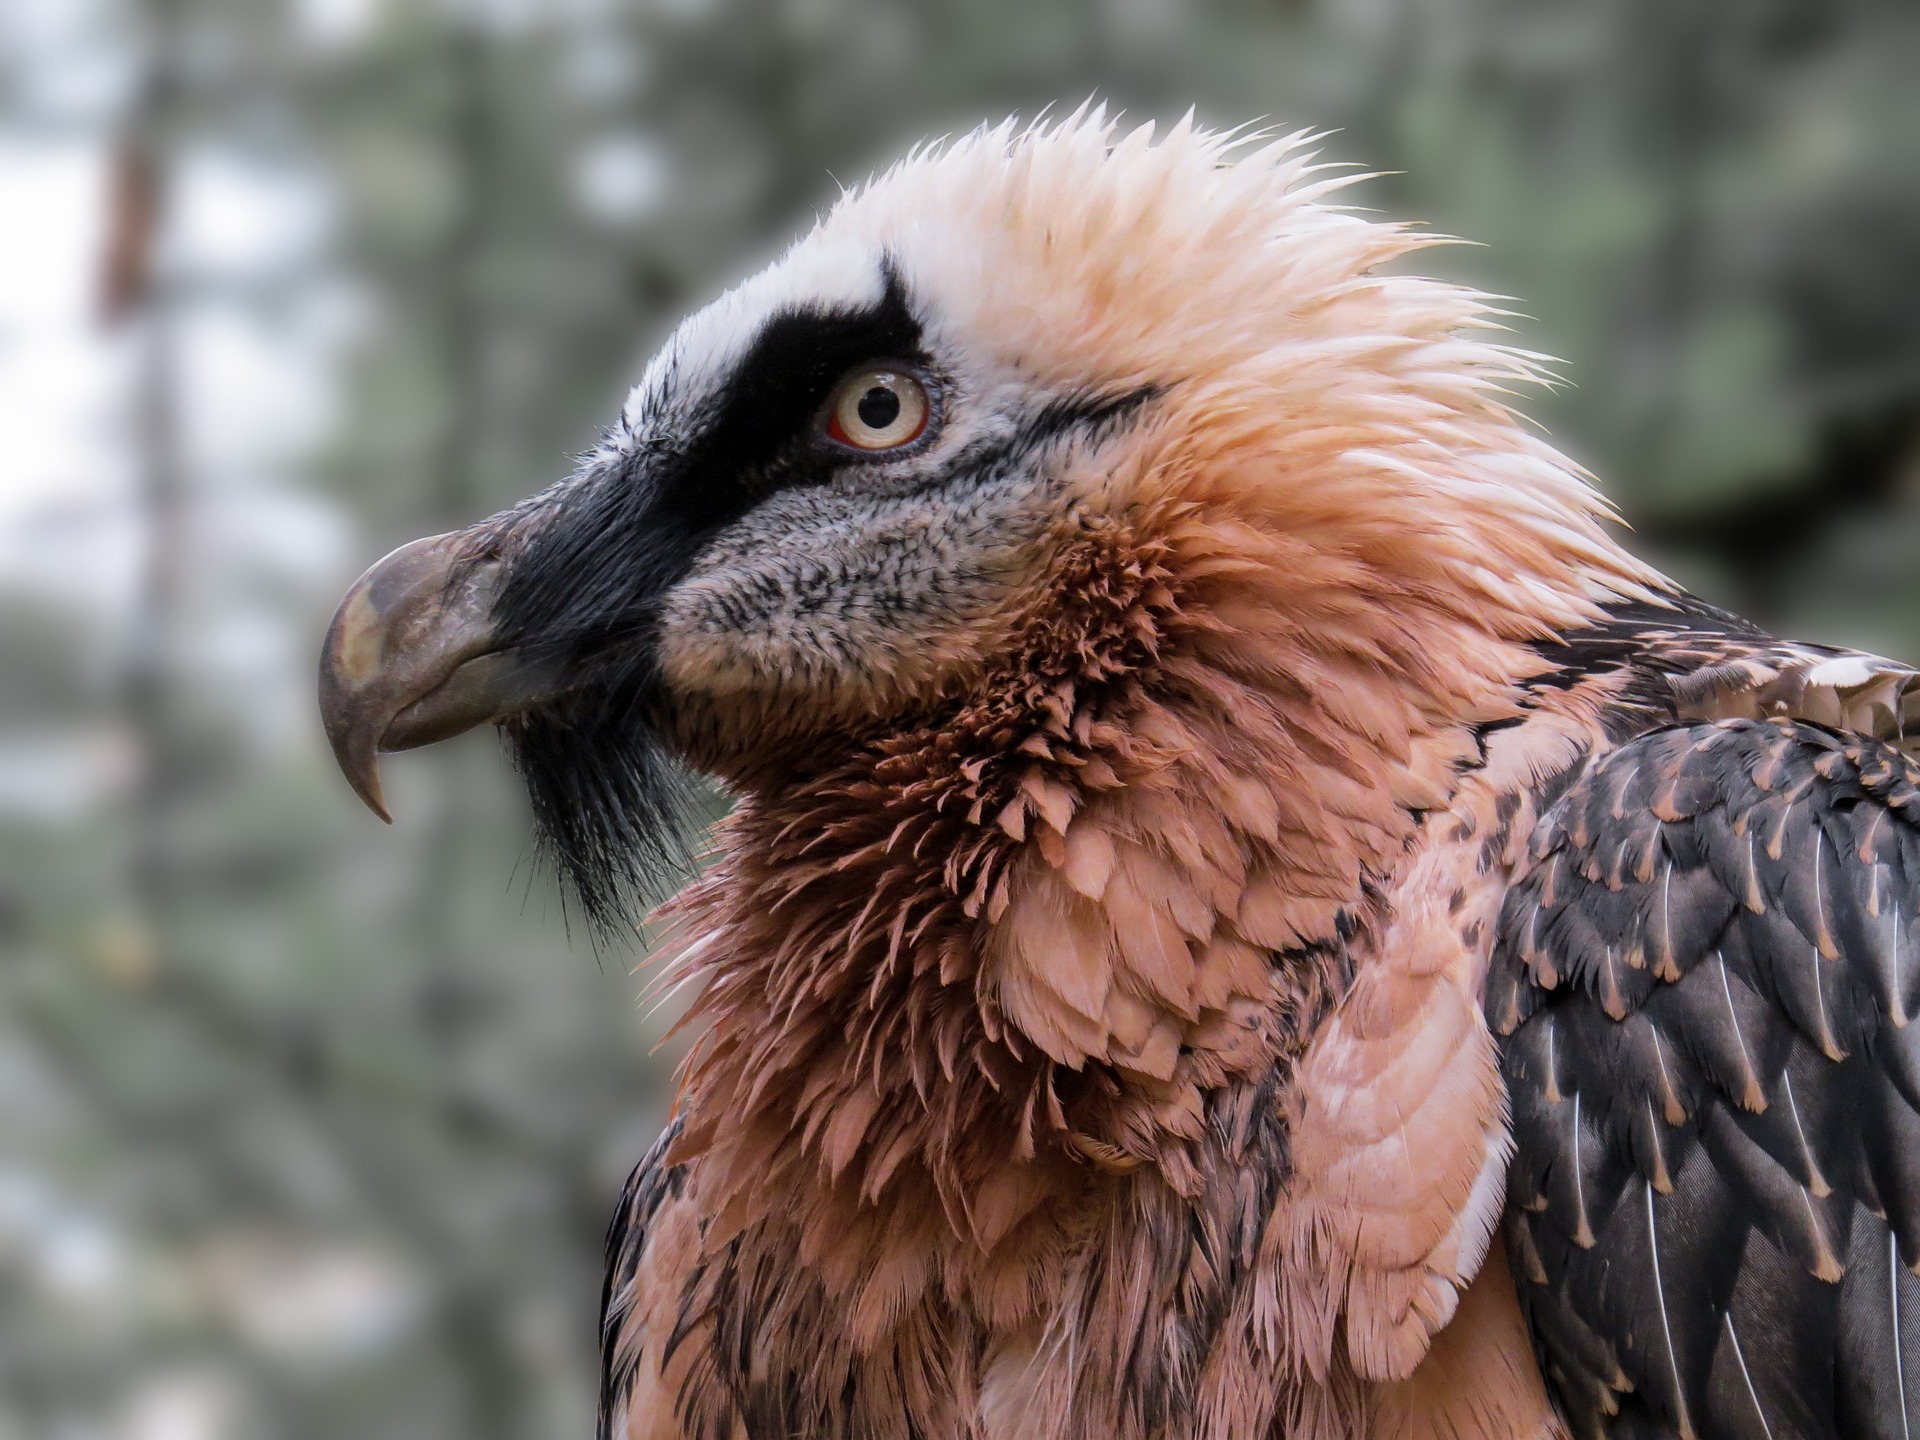 Fun activities - The Bearded Vulture